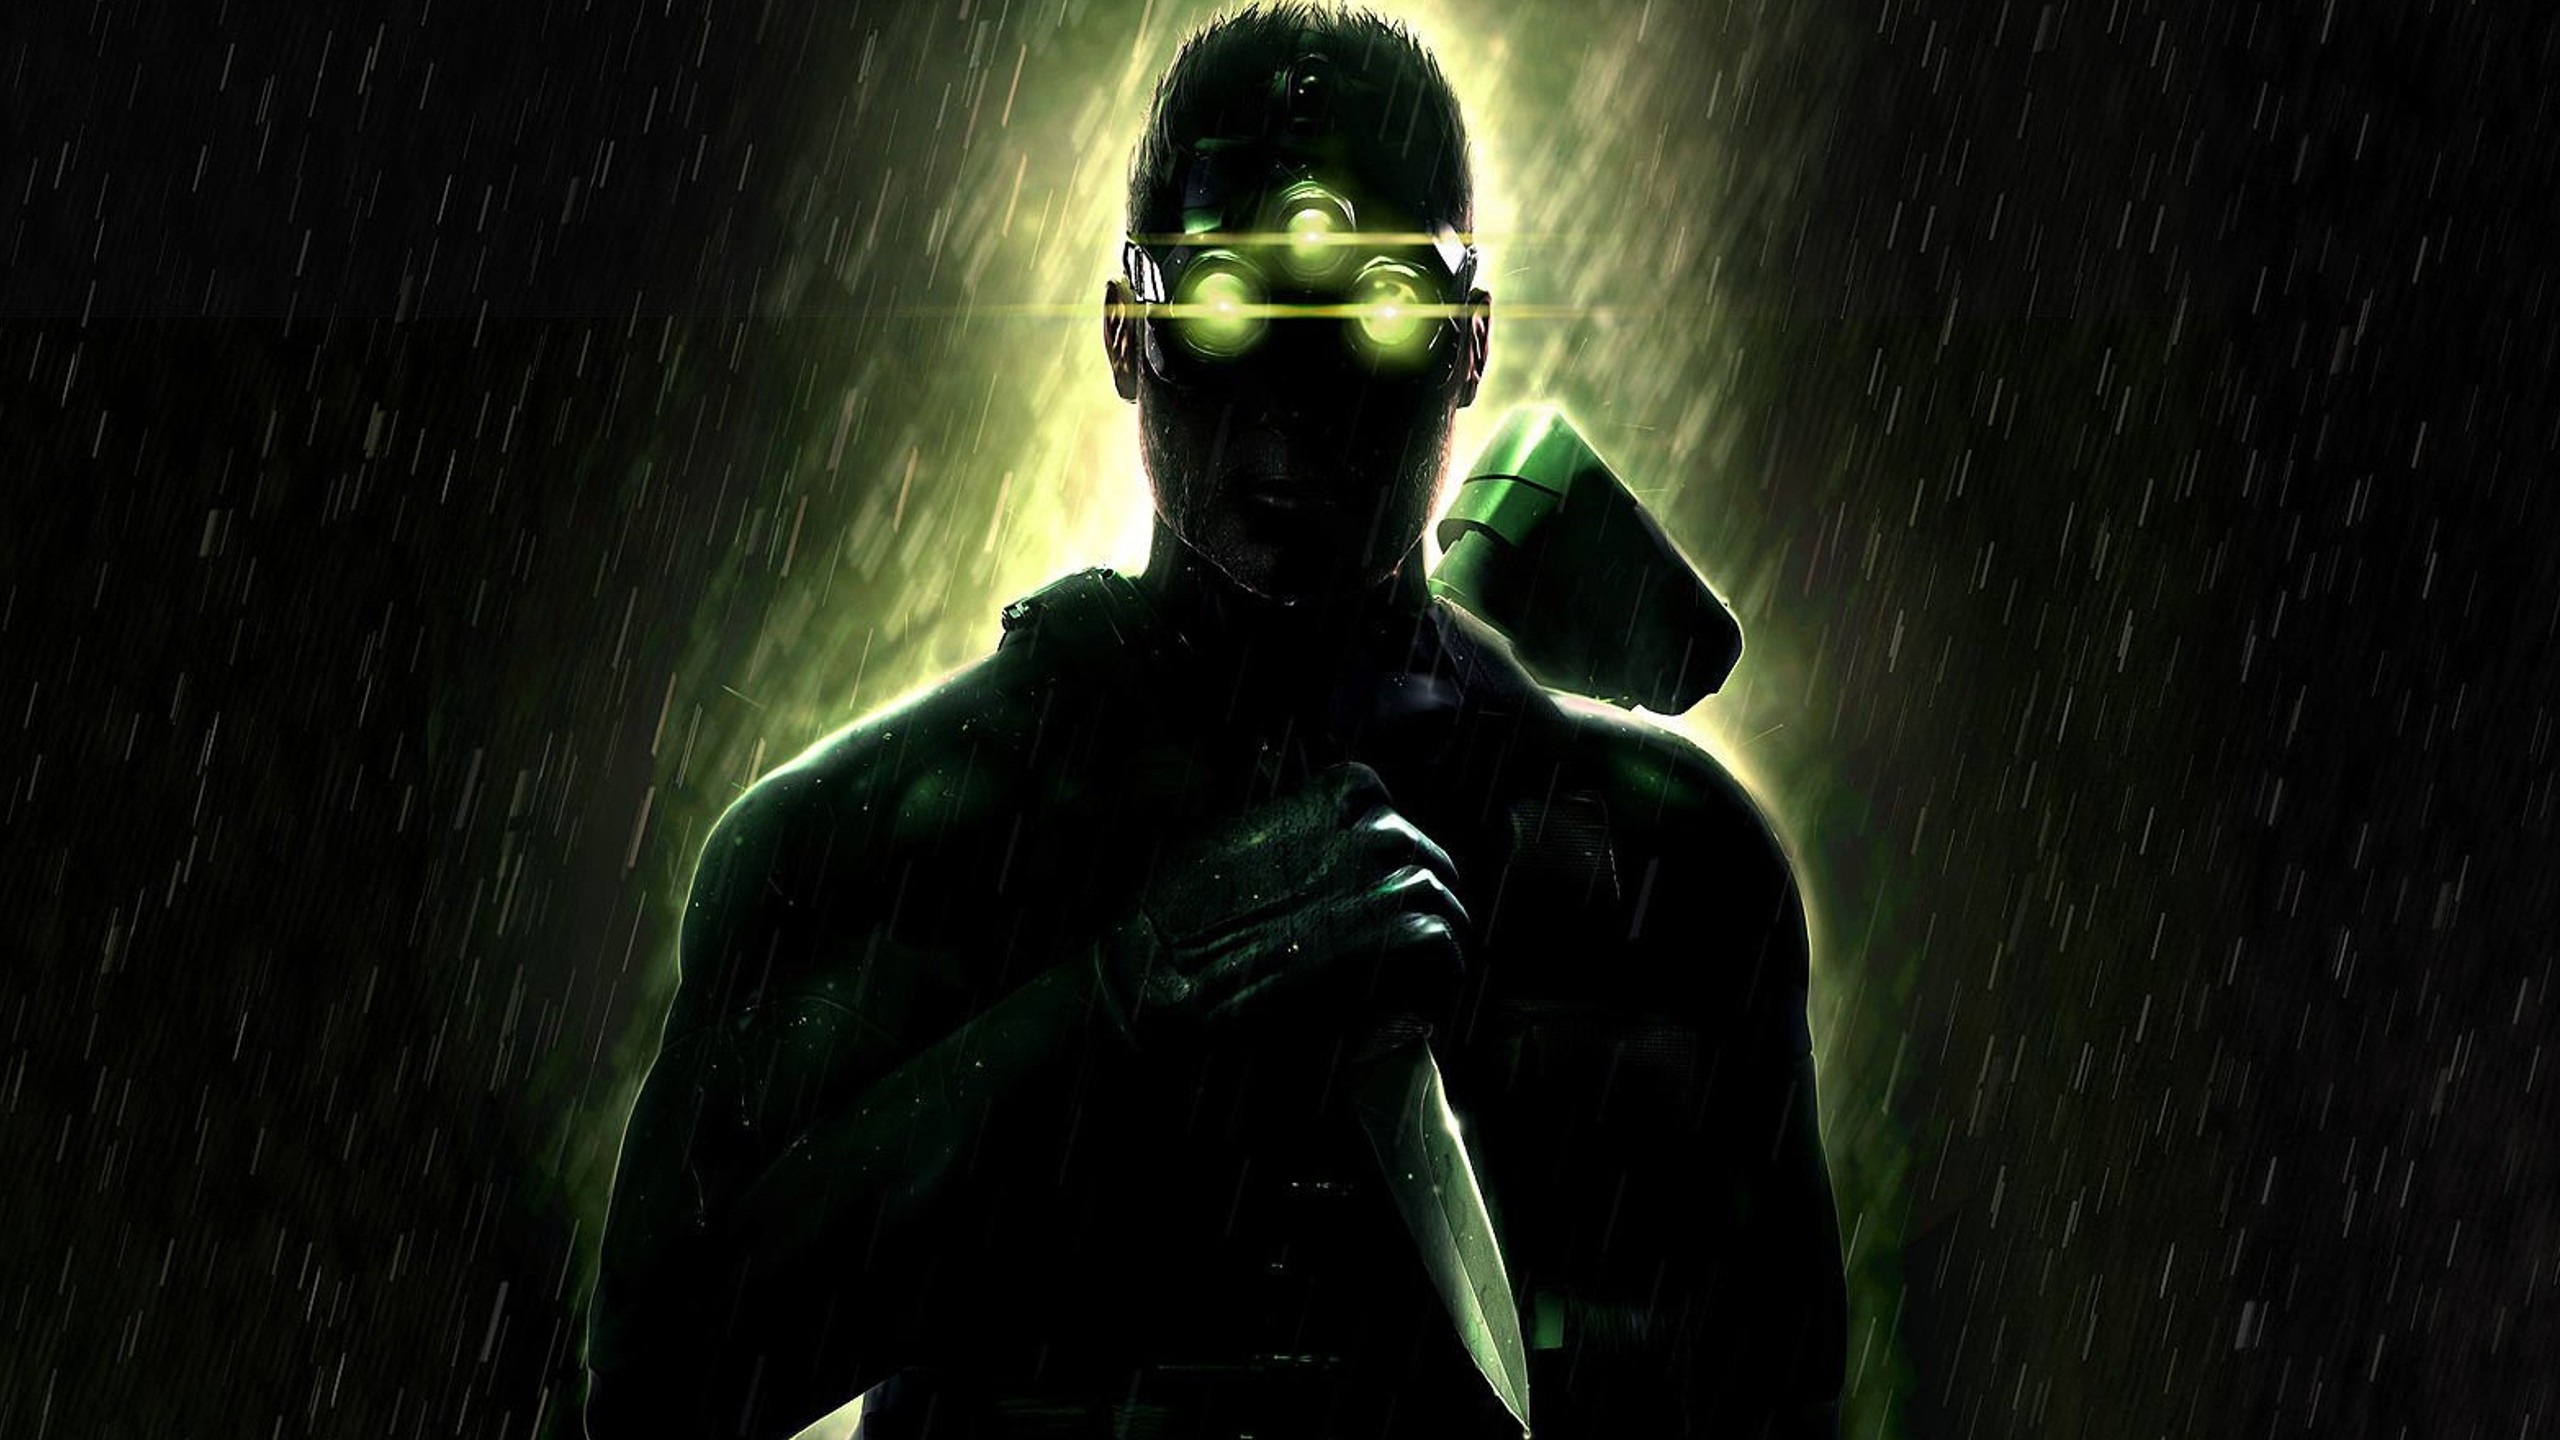 Are you absolutely certain you want another Splinter Cell? : r/Splintercell